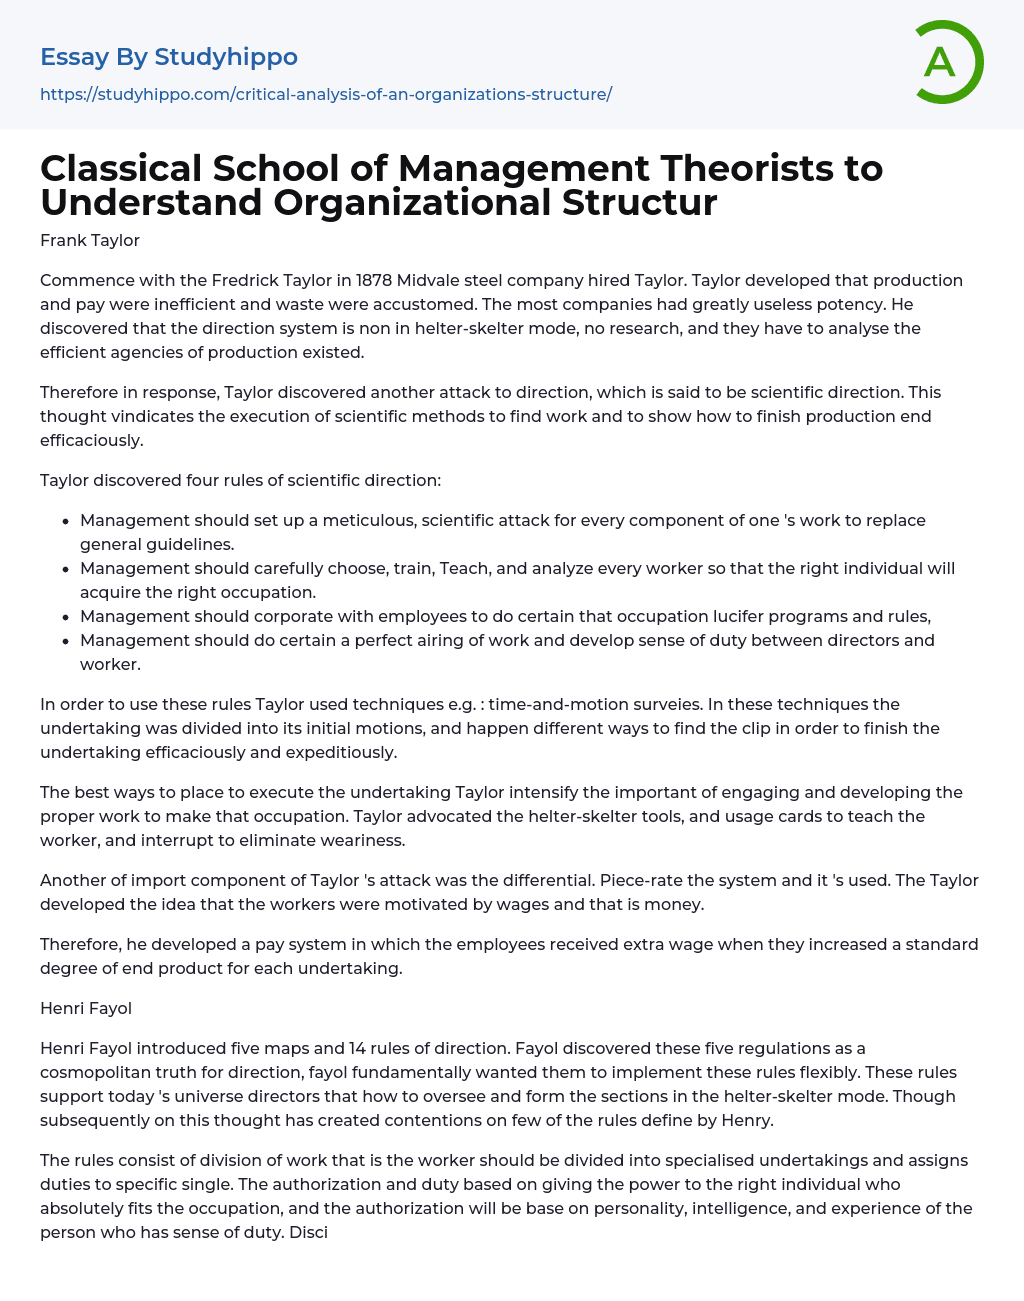 Classical School of Management Theorists to Understand Organizational Structur Essay Example